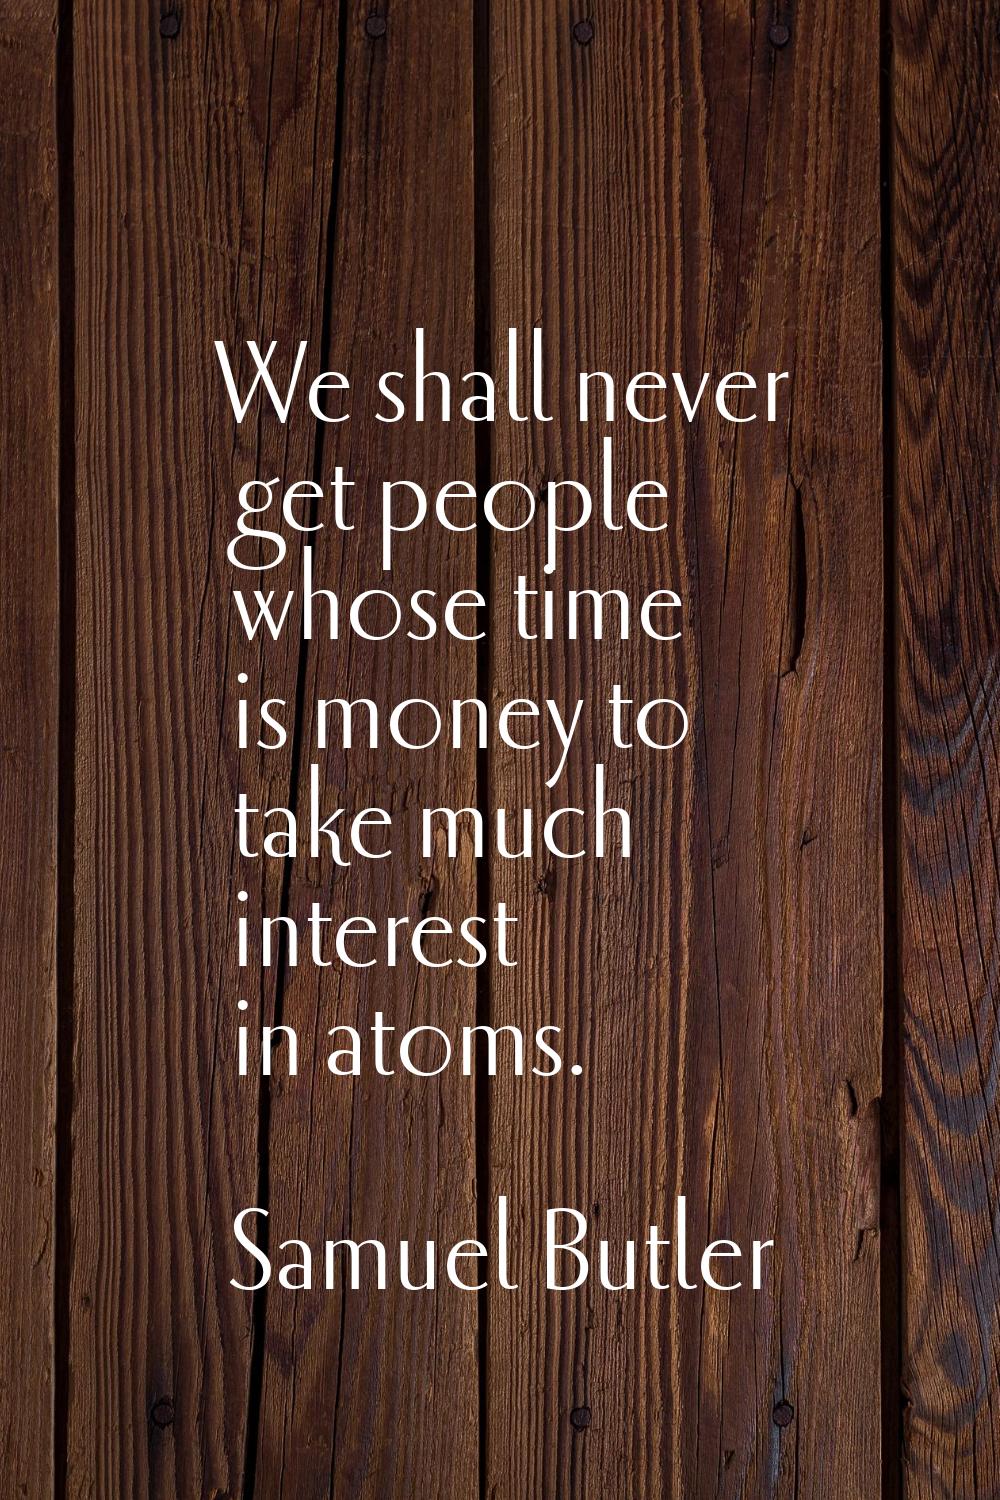 We shall never get people whose time is money to take much interest in atoms.